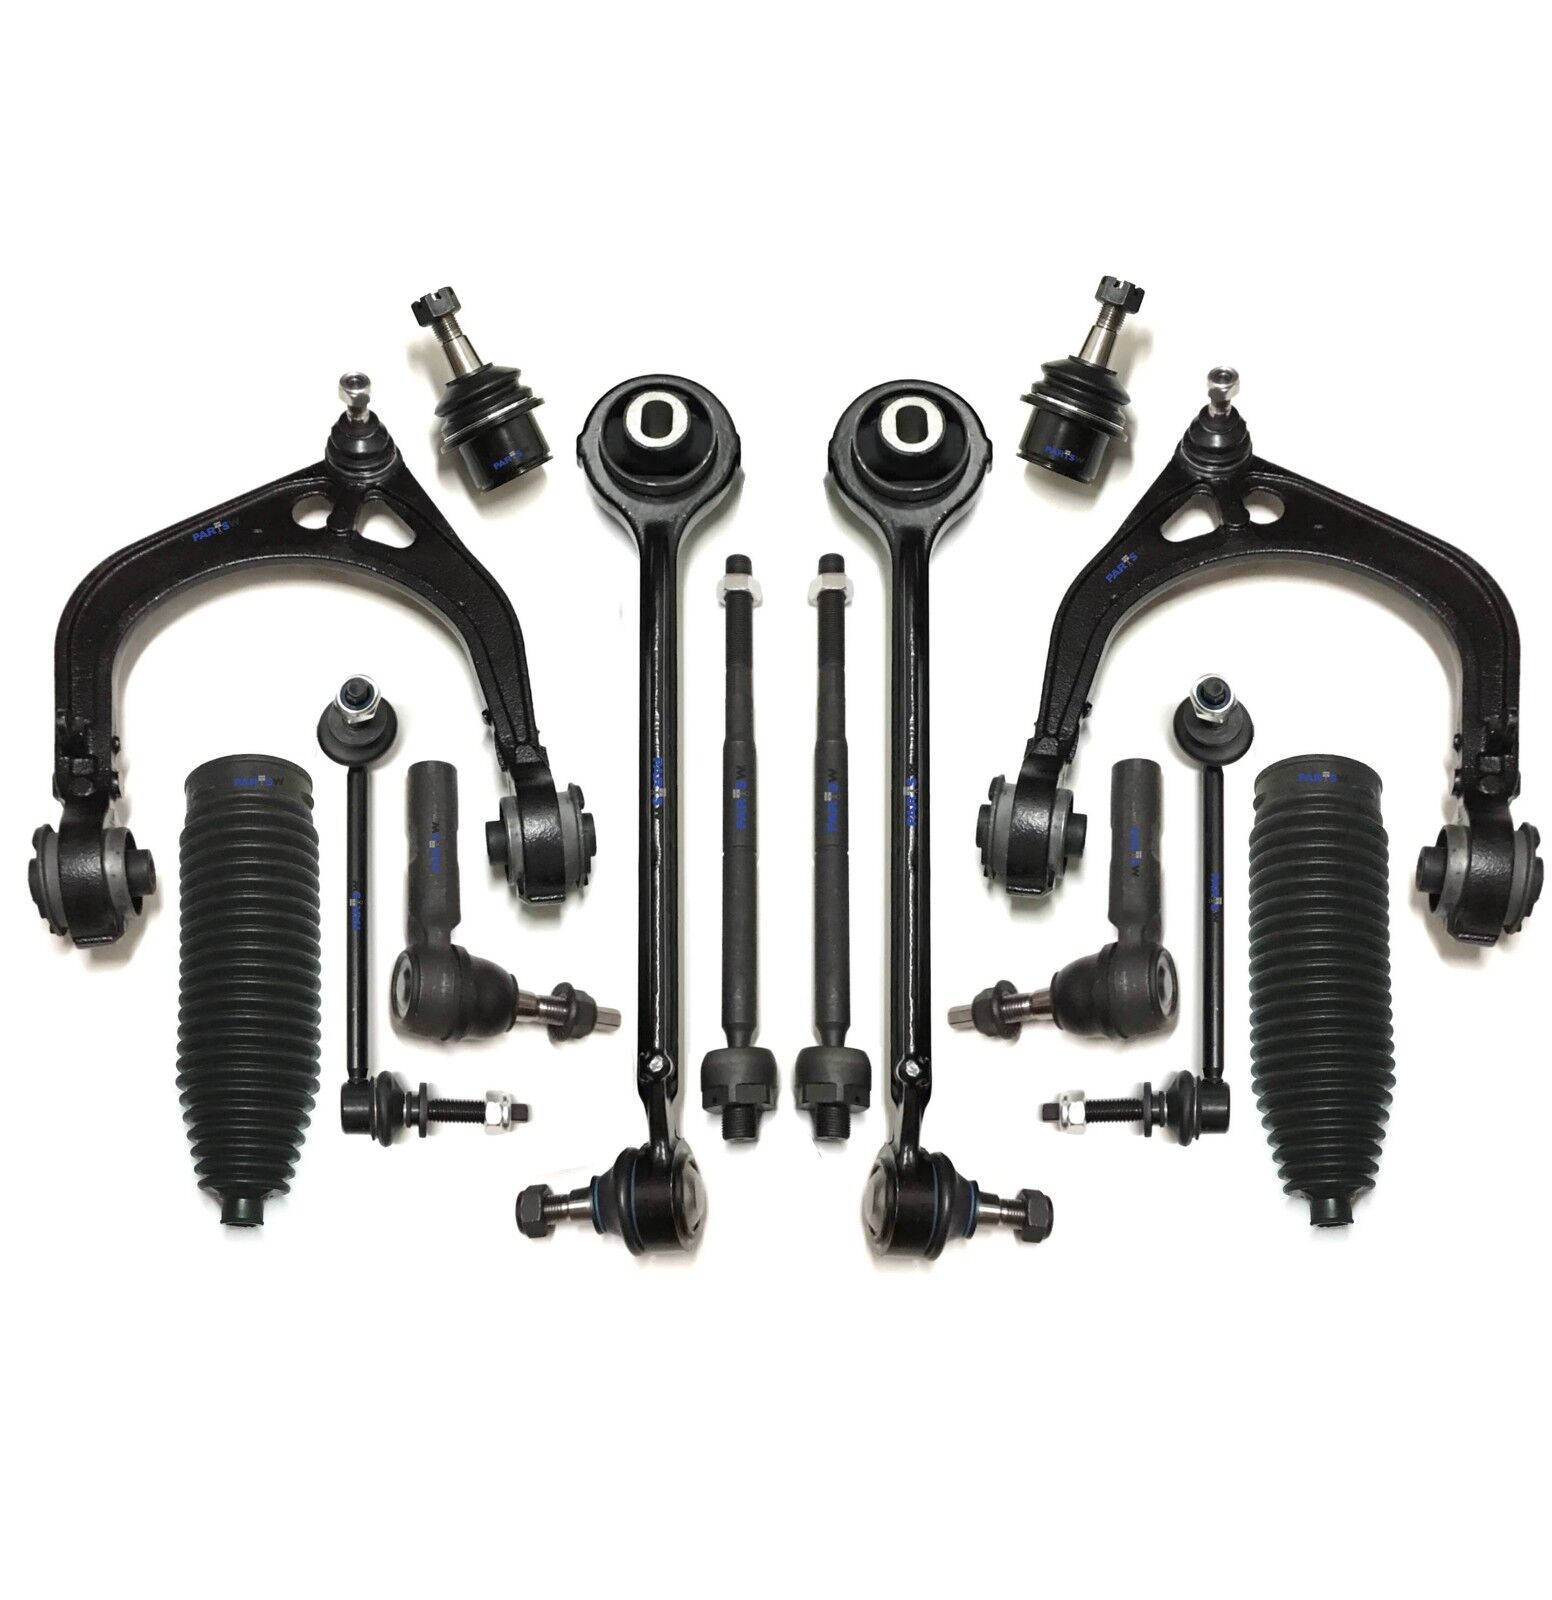 20 Pc Suspension Kit for Chysler 300 Challenger Charger Magnum RWD Control Arms